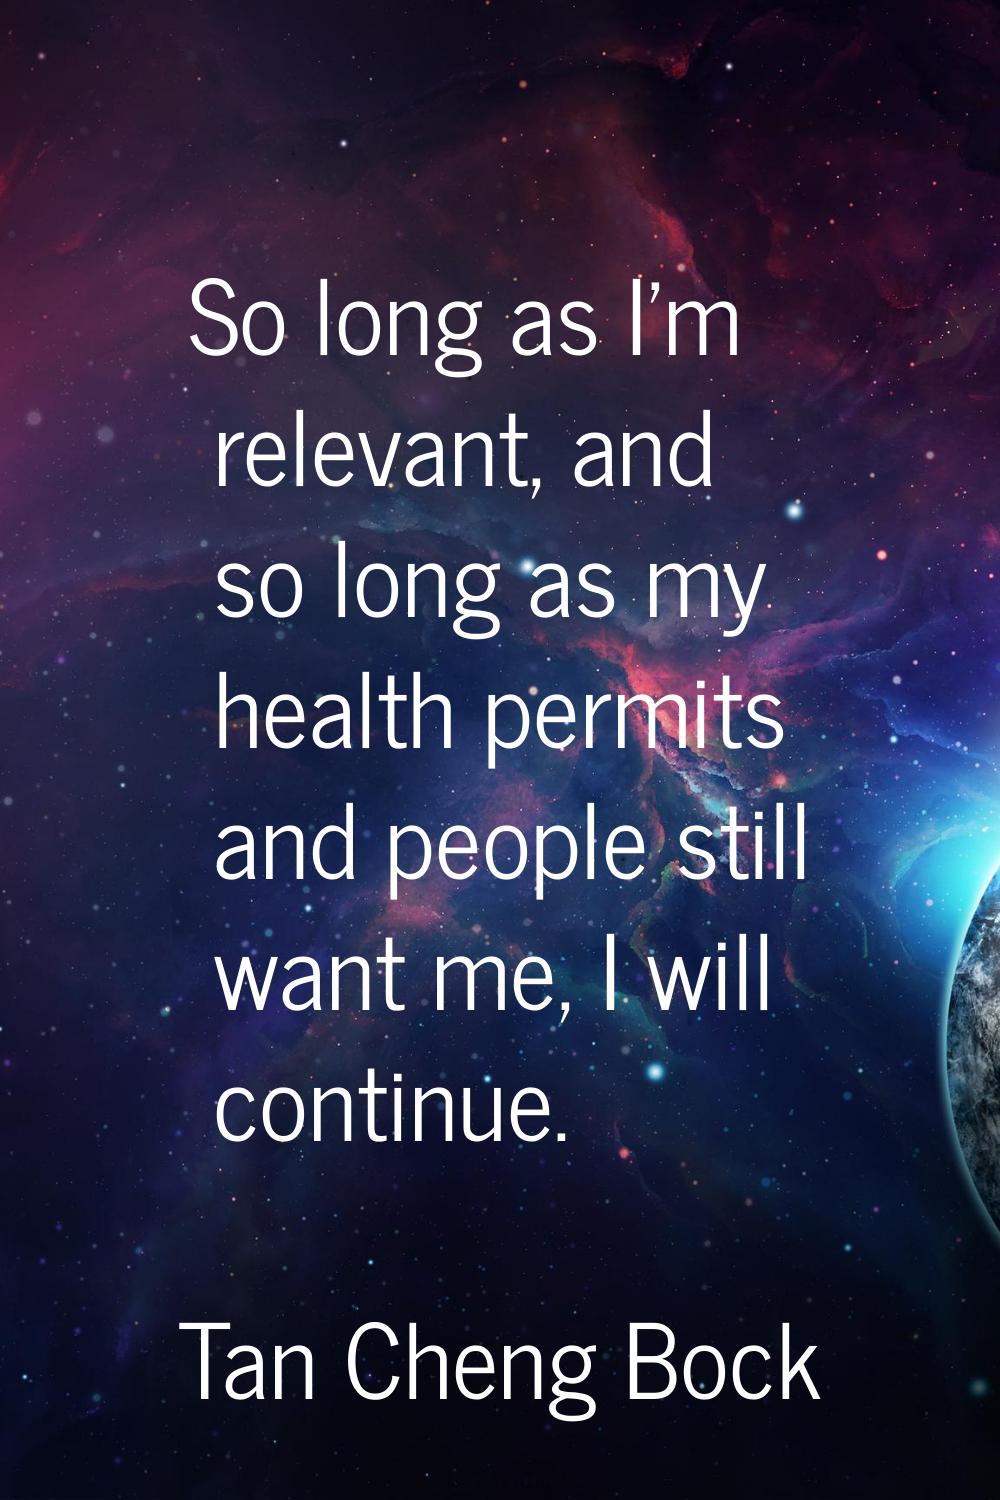 So long as I'm relevant, and so long as my health permits and people still want me, I will continue